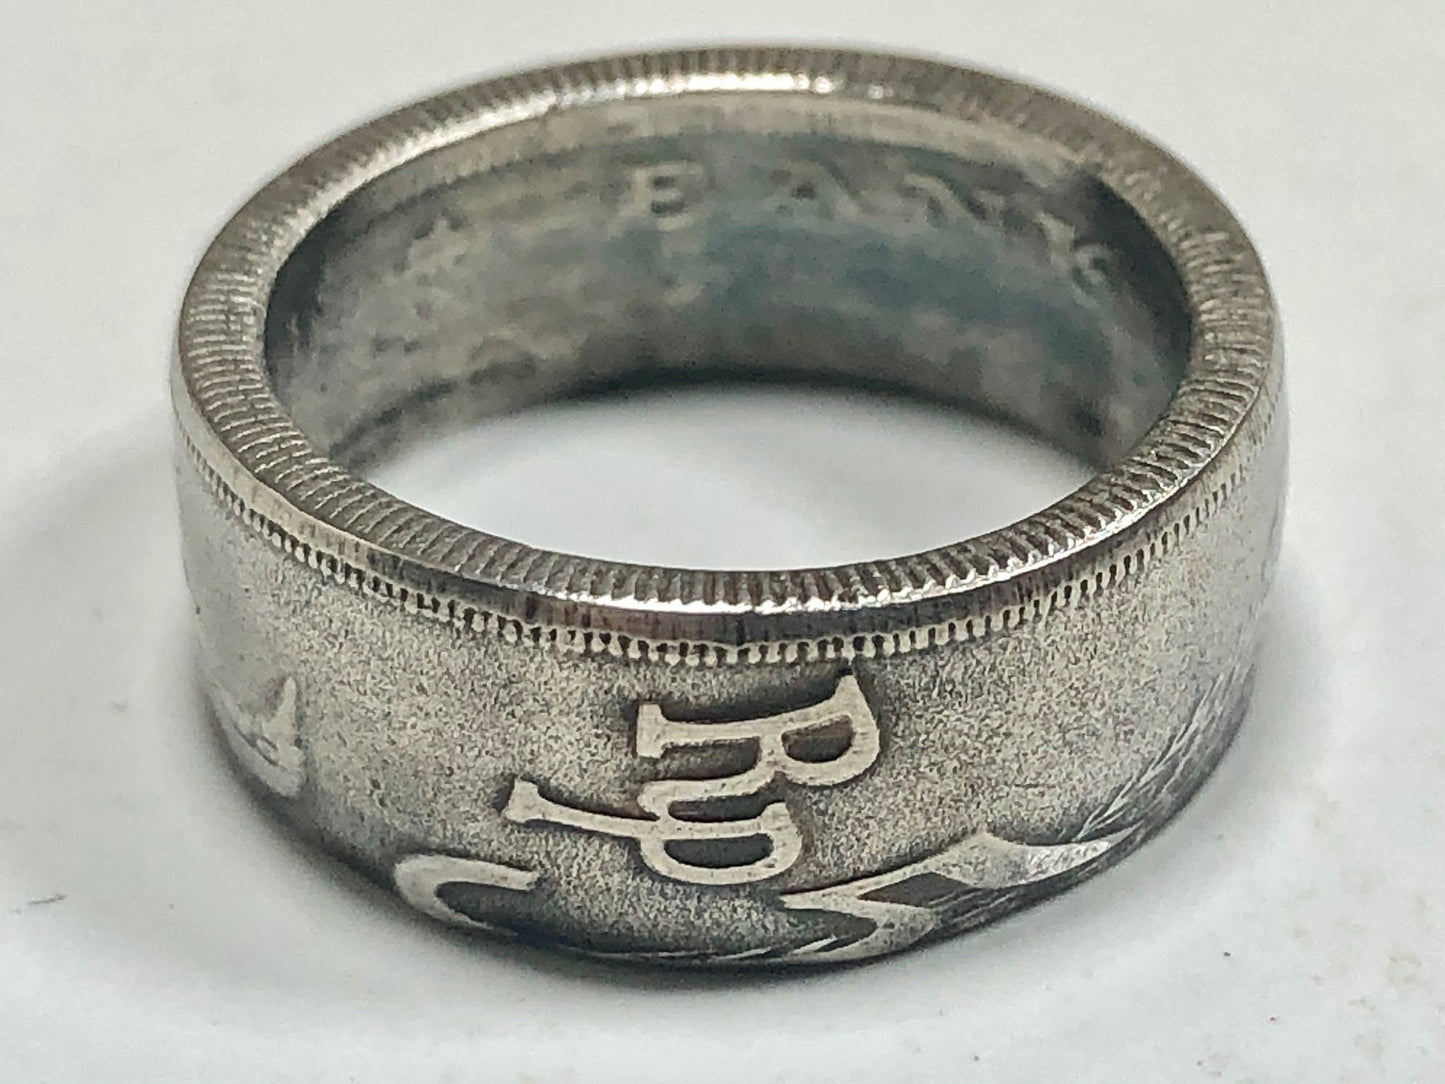 Indonesia Coin Ring 50 Rupiah Indonesian Handmade Personal Custom Ring Gift For Friend Coin Ring Gift For Him Her World Coin Collector